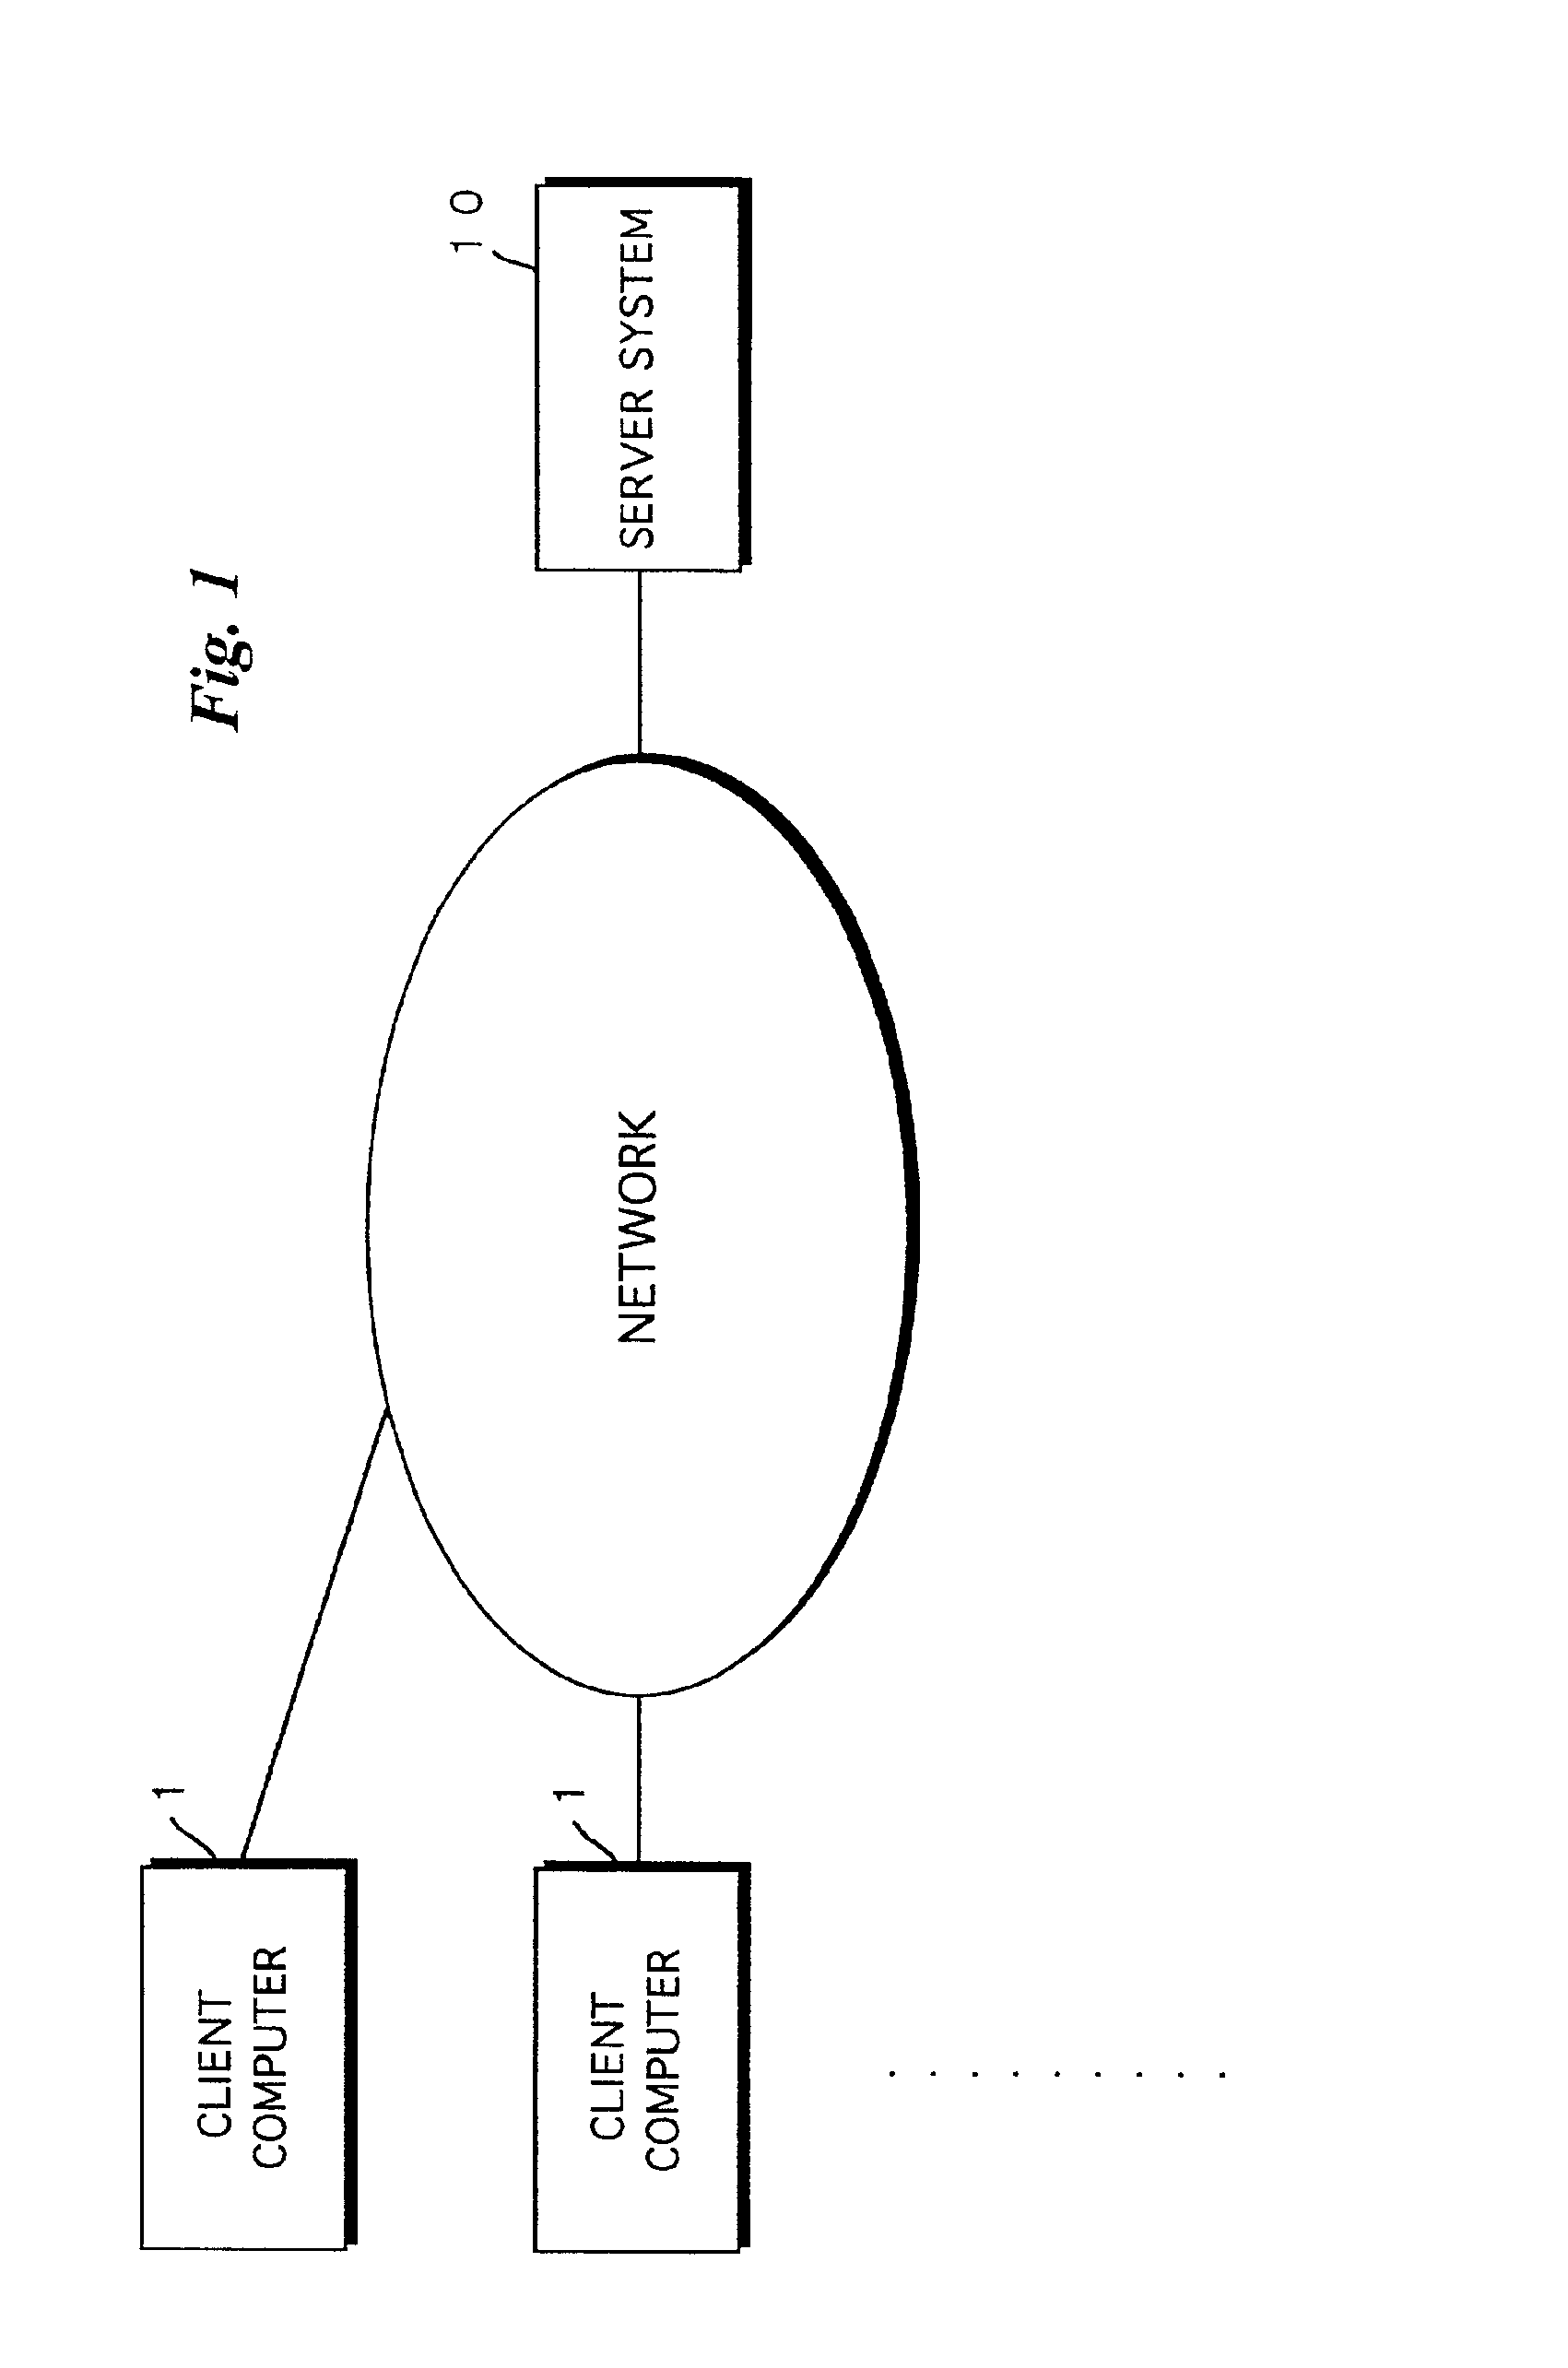 Image data communication system, server system, method of controlling operation of same, and recording medium storing program for control of server system